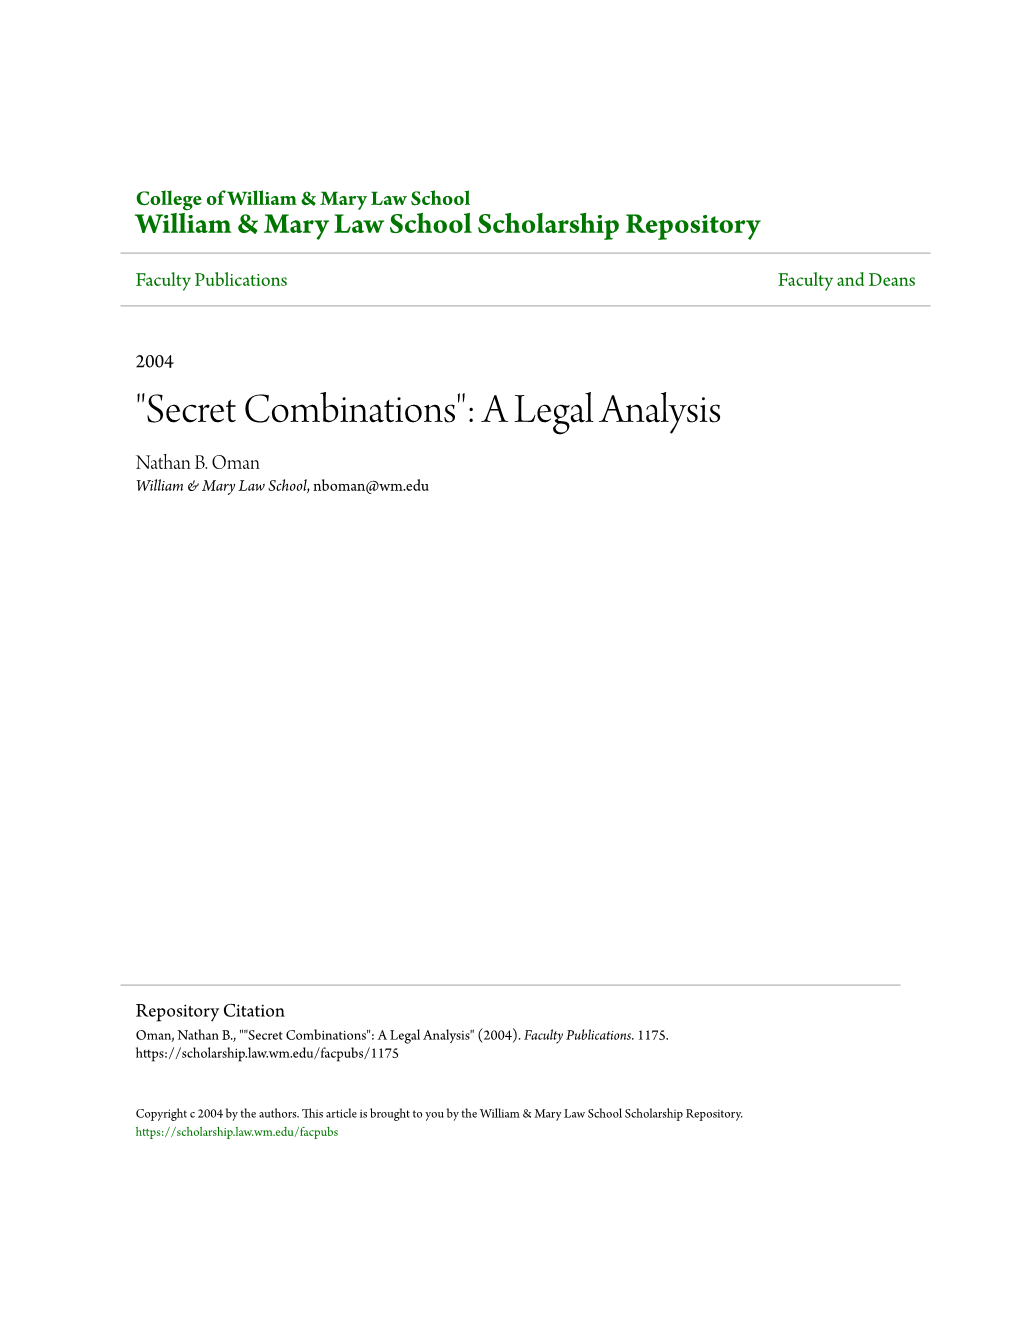 Secret Combinations": a Legal Analysis Nathan B